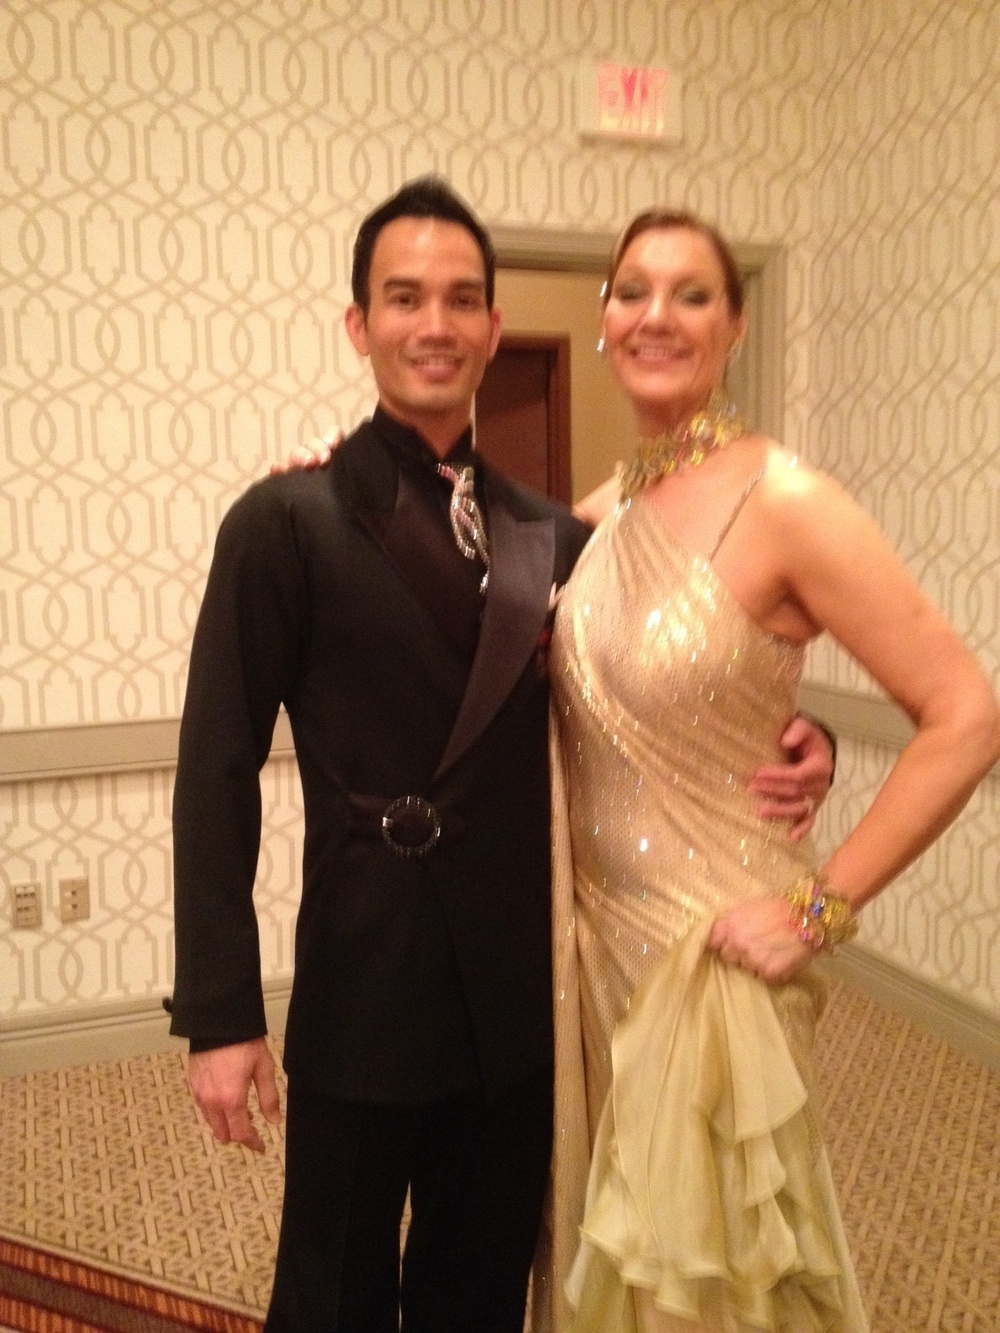 Ballroom dancing motivates civil affairs officer into new lifestyle change